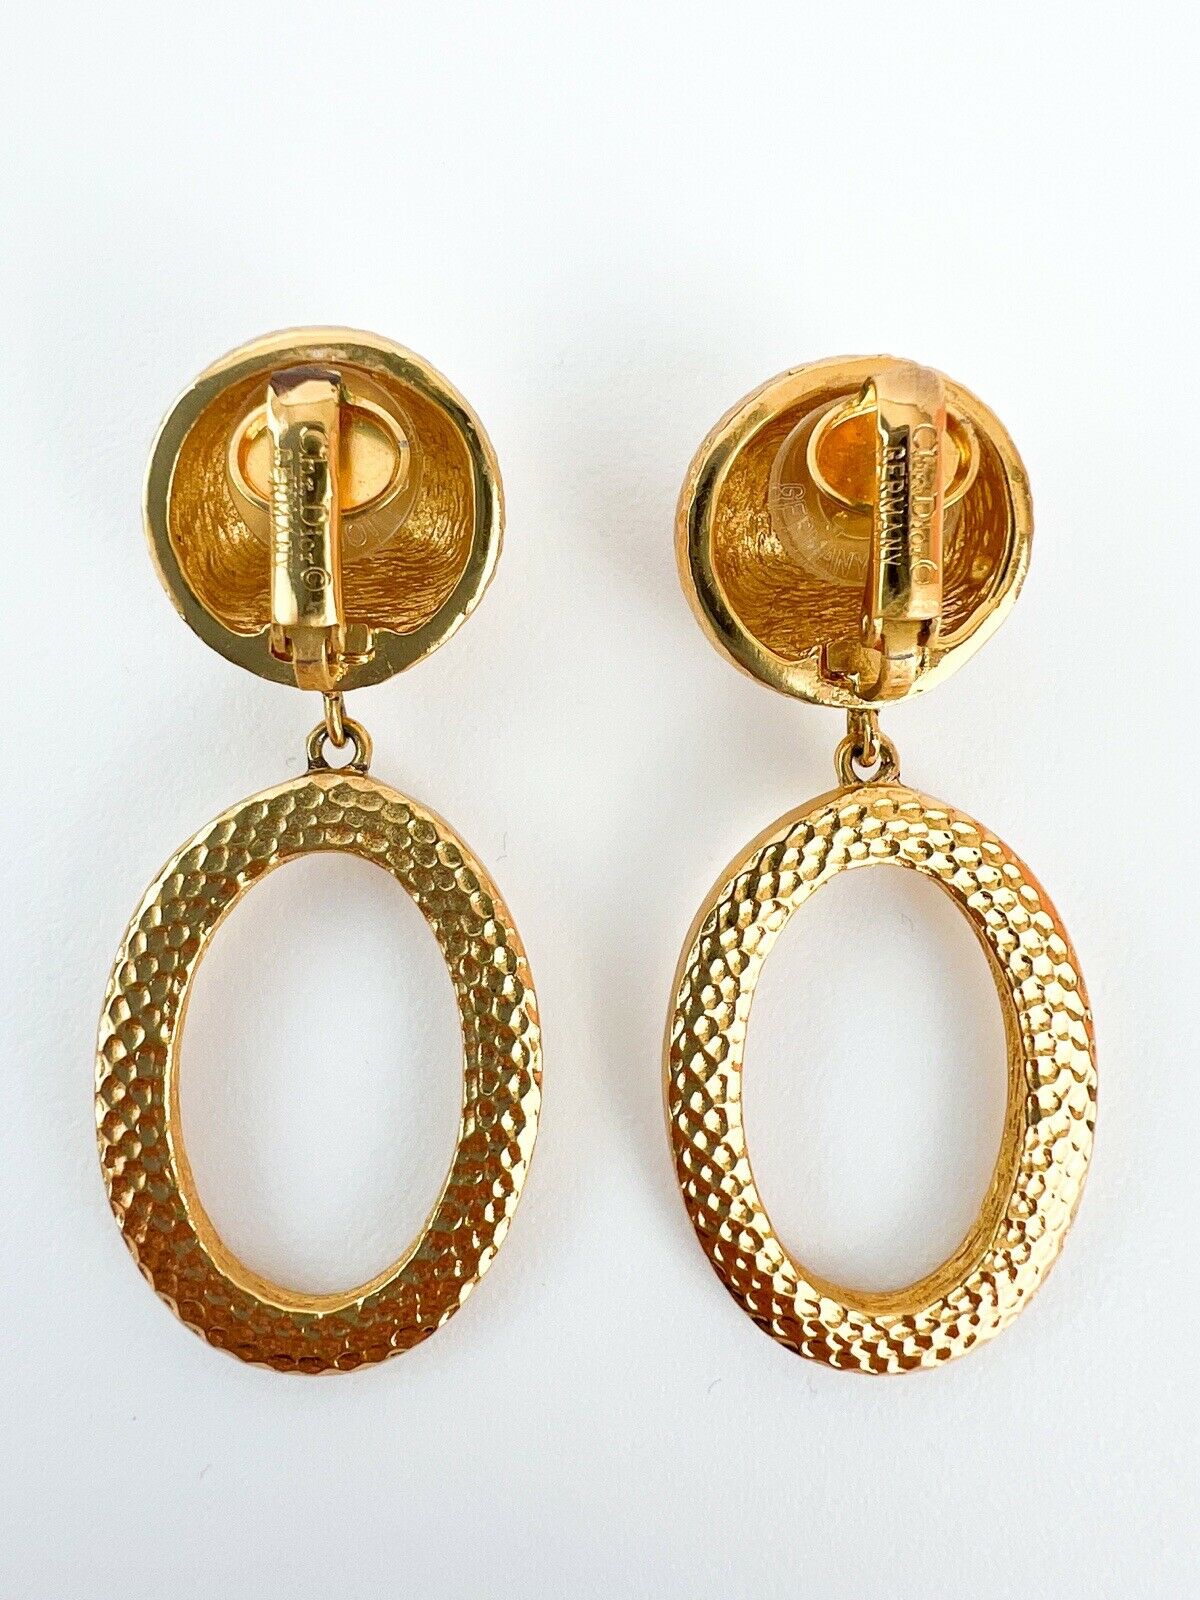 SOLD OUT】Christian Dior Germany Vintage Clip on Hoop Earrings